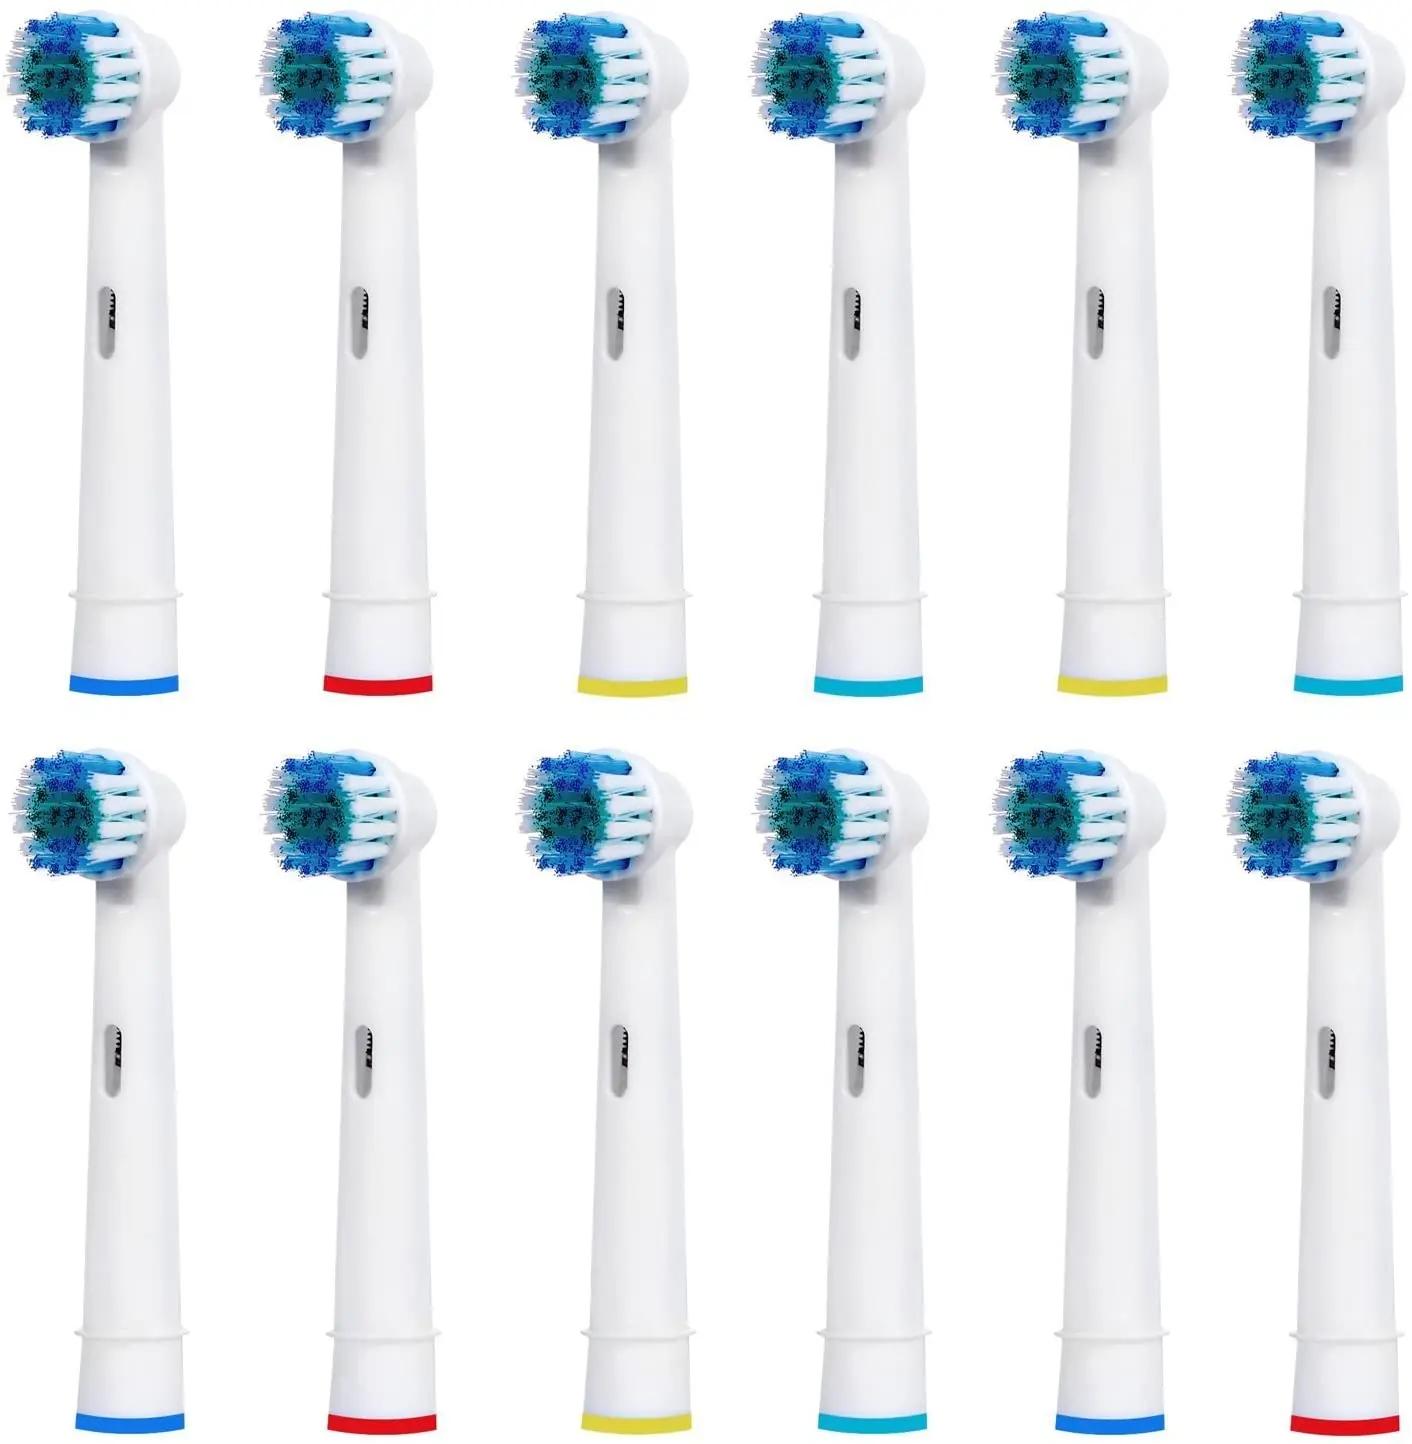 

12pcs Replacement Brush Heads For Oral-B Electric Toothbrush Advance Power/Vitality Precision Clean/Pro Health Dropshipping